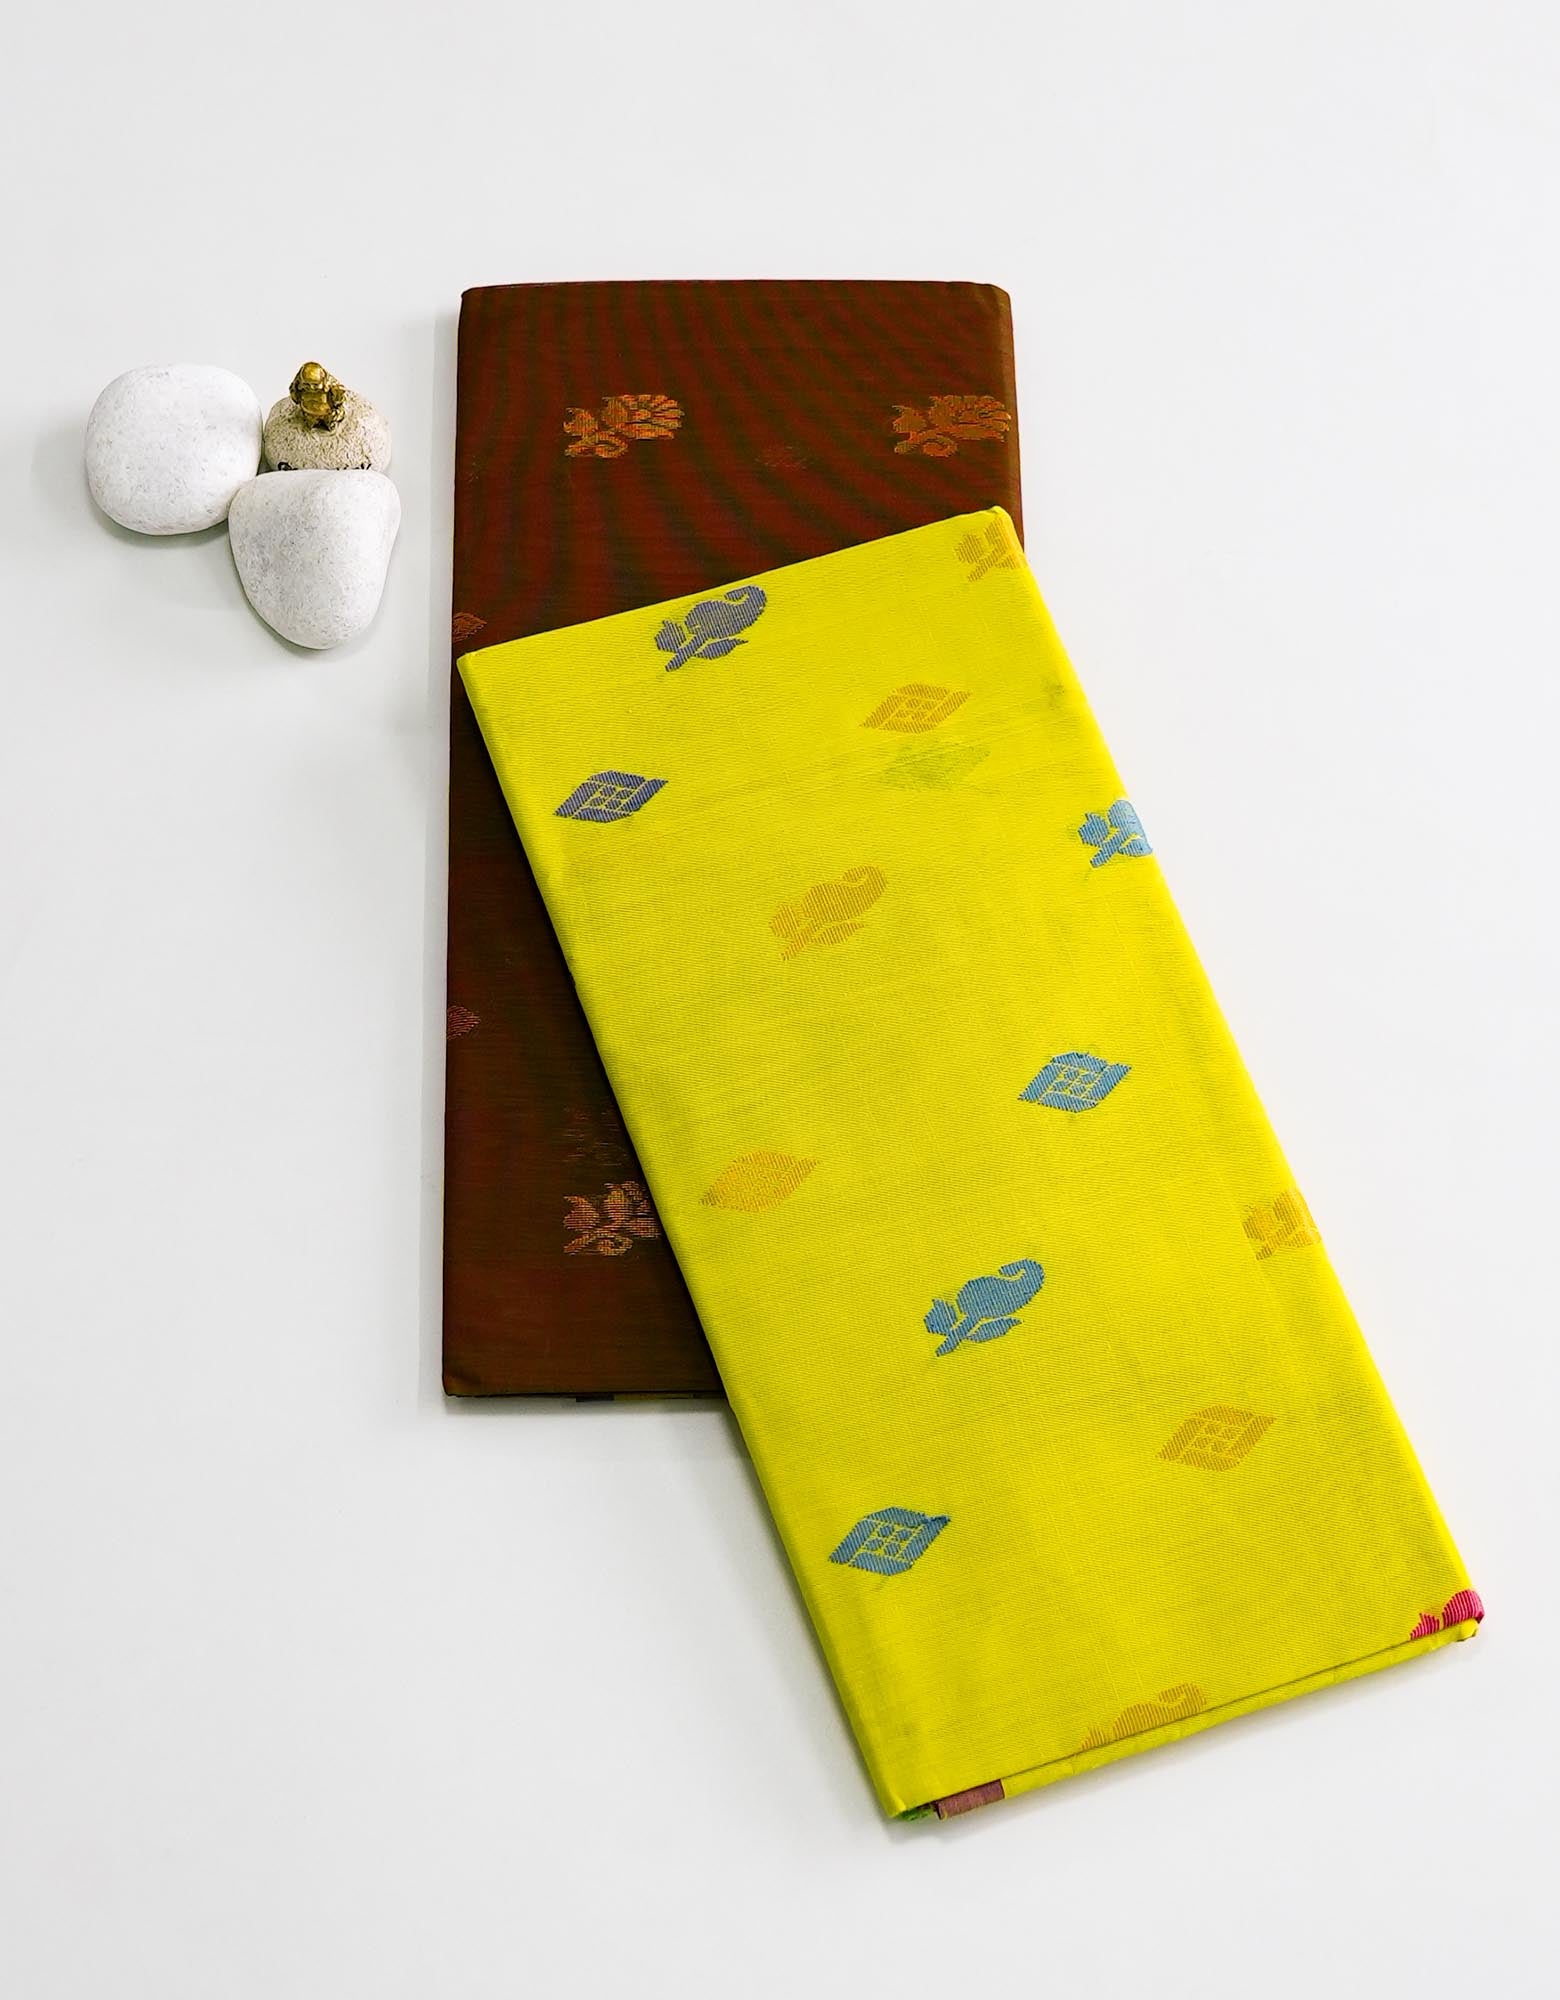 Venkatagiri Cotton Sarees with two different colors dirt brown and Chartreuse Yellow